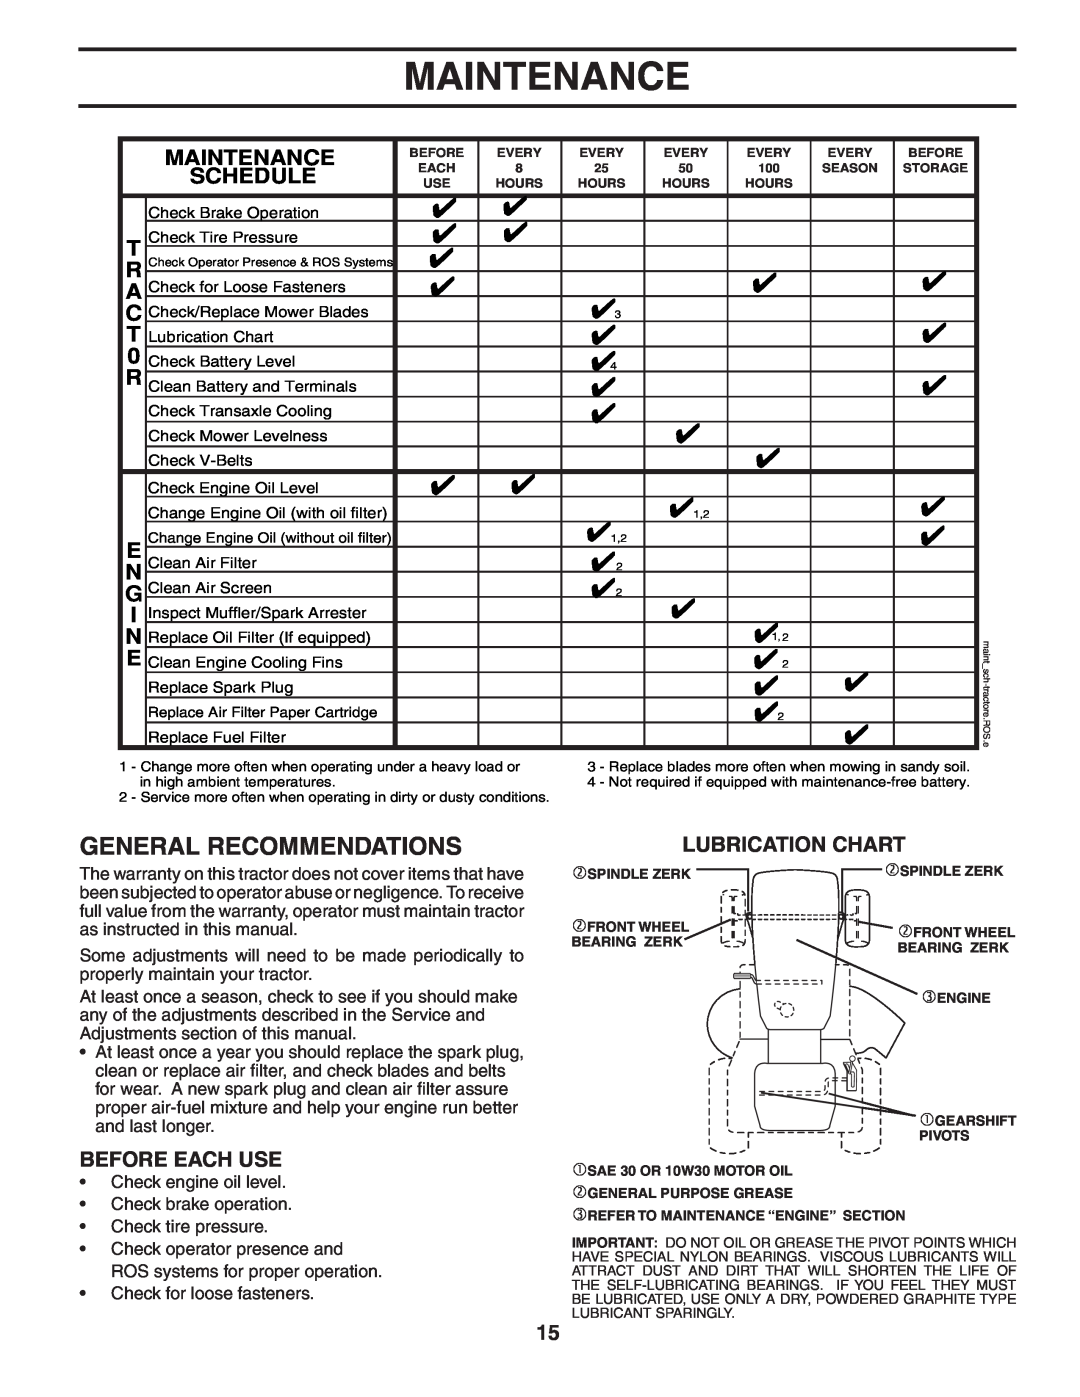 Poulan HD17542 manual Maintenance, General Recommendations, Schedule, Before Each Use, Lubrication Chart 